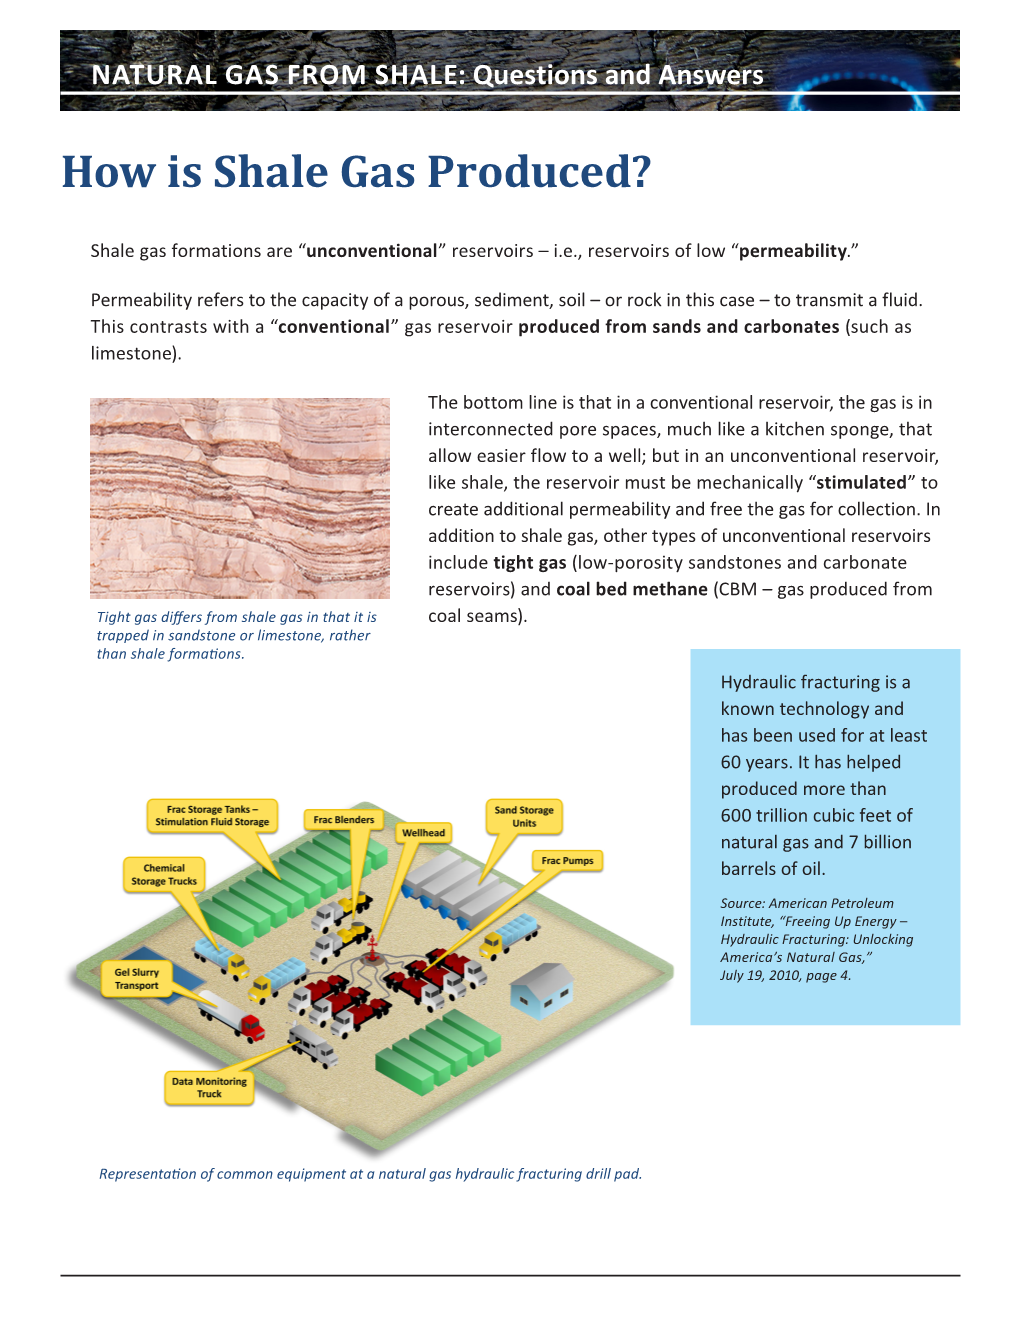 How Is Shale Gas Produced?